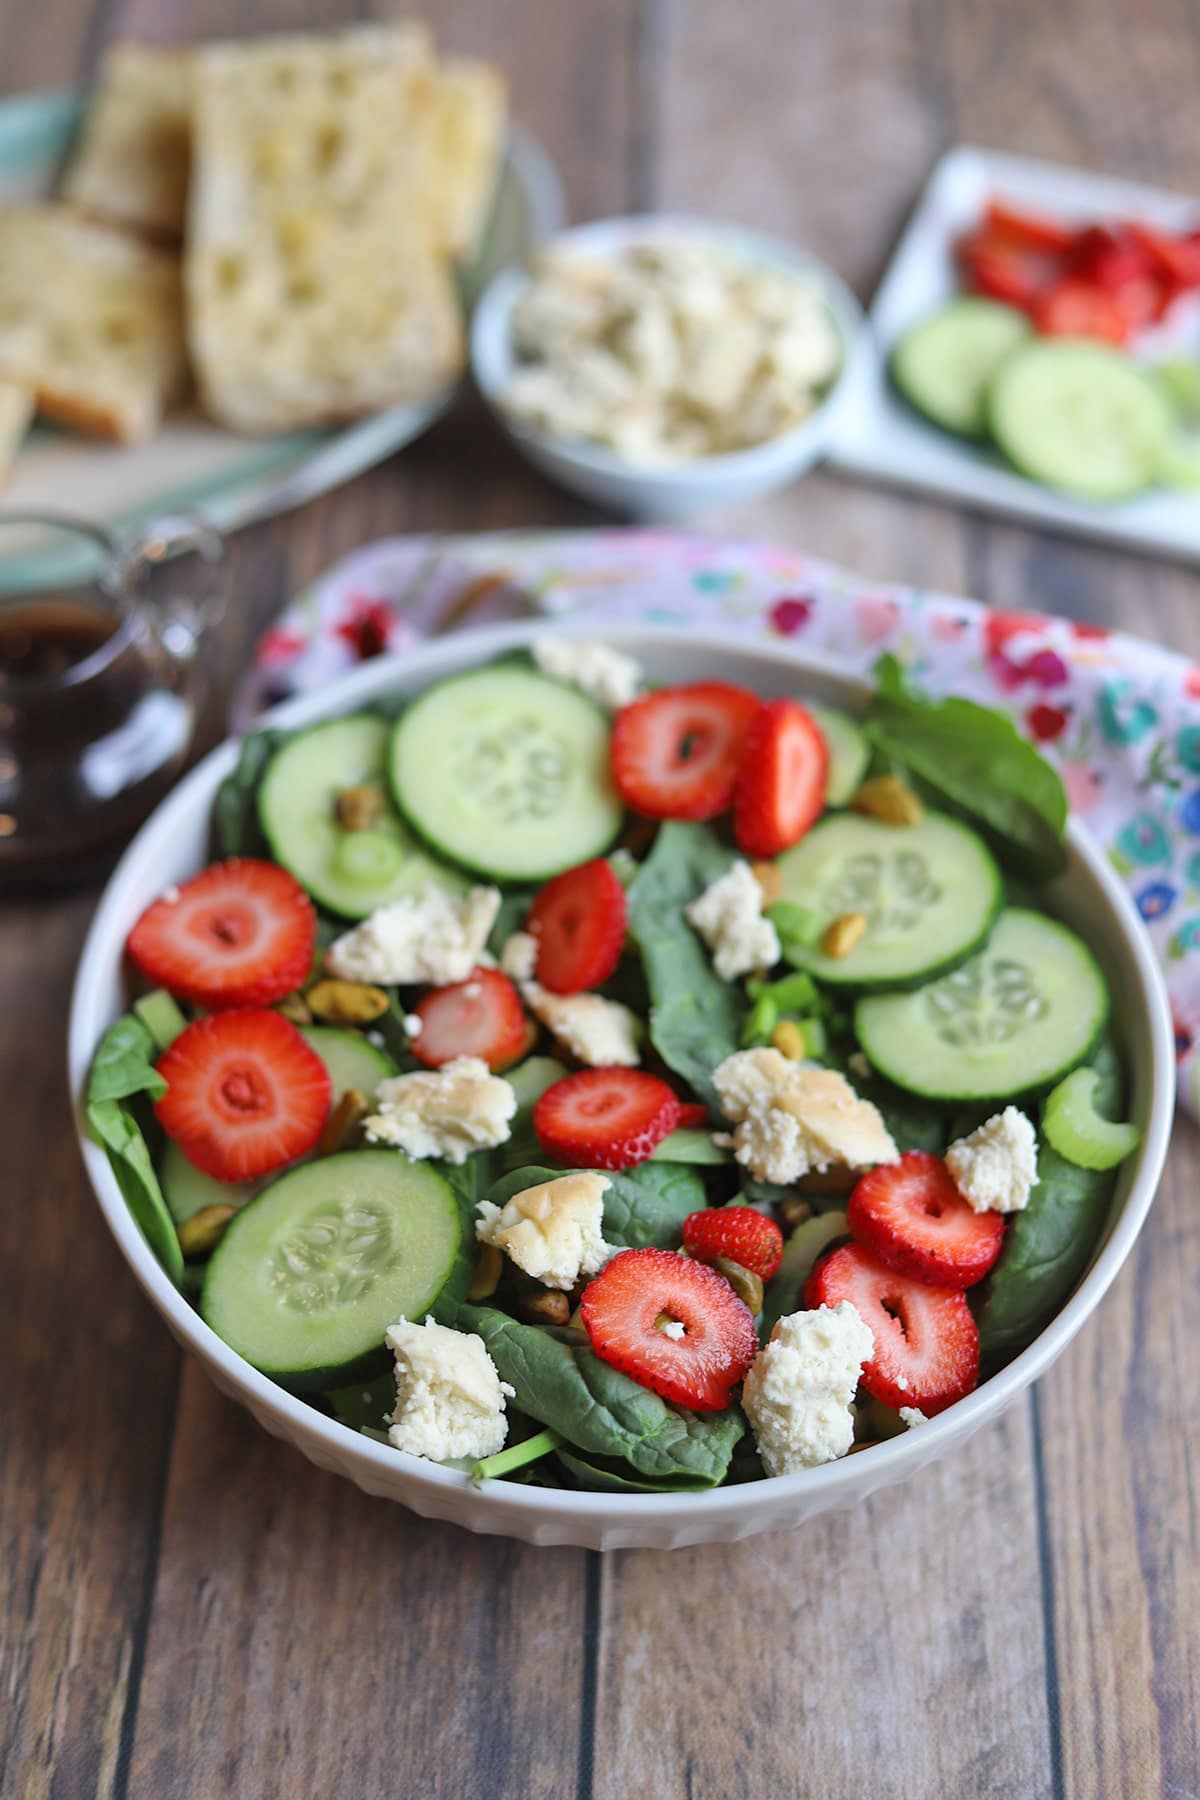 Spinach salad with strawberries and vegan feta.